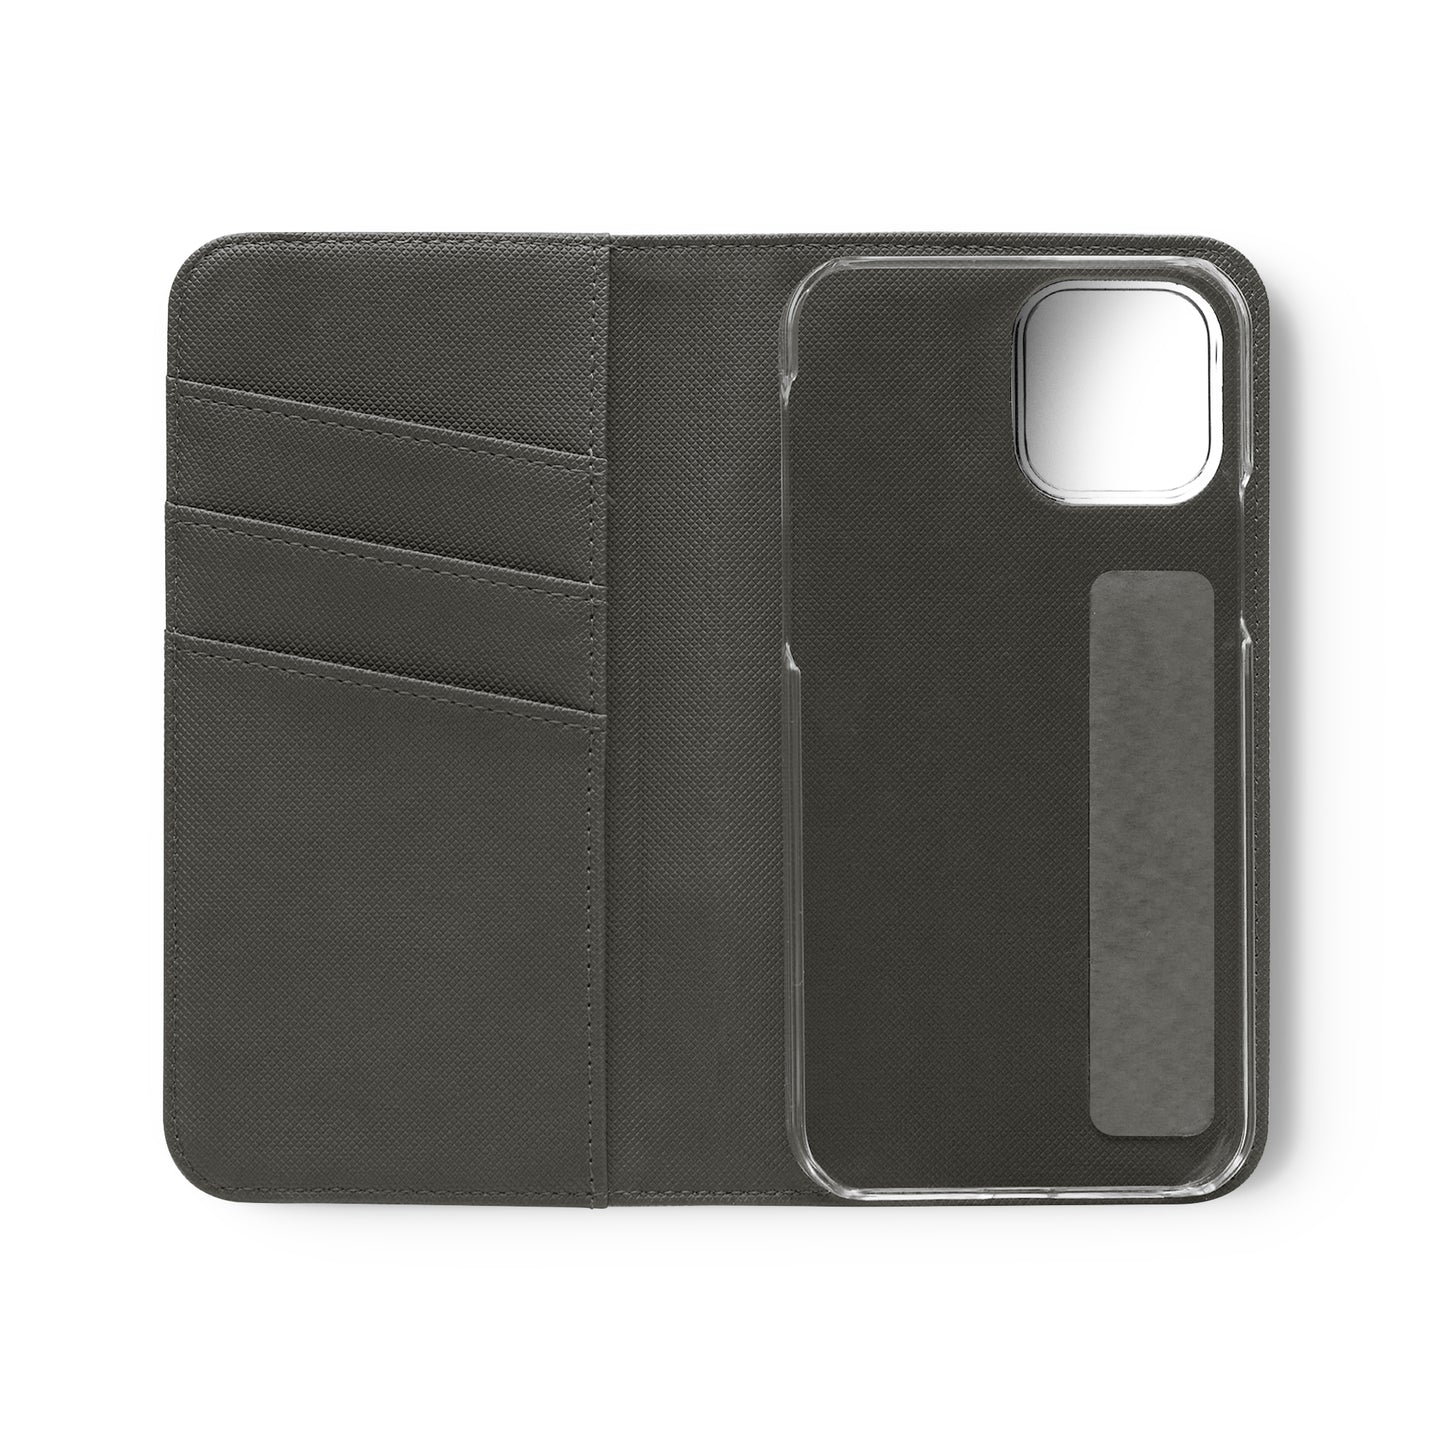 Birthed In Purpose, Covered In Favor, Branded With God's Greatness Phone Flip Cases